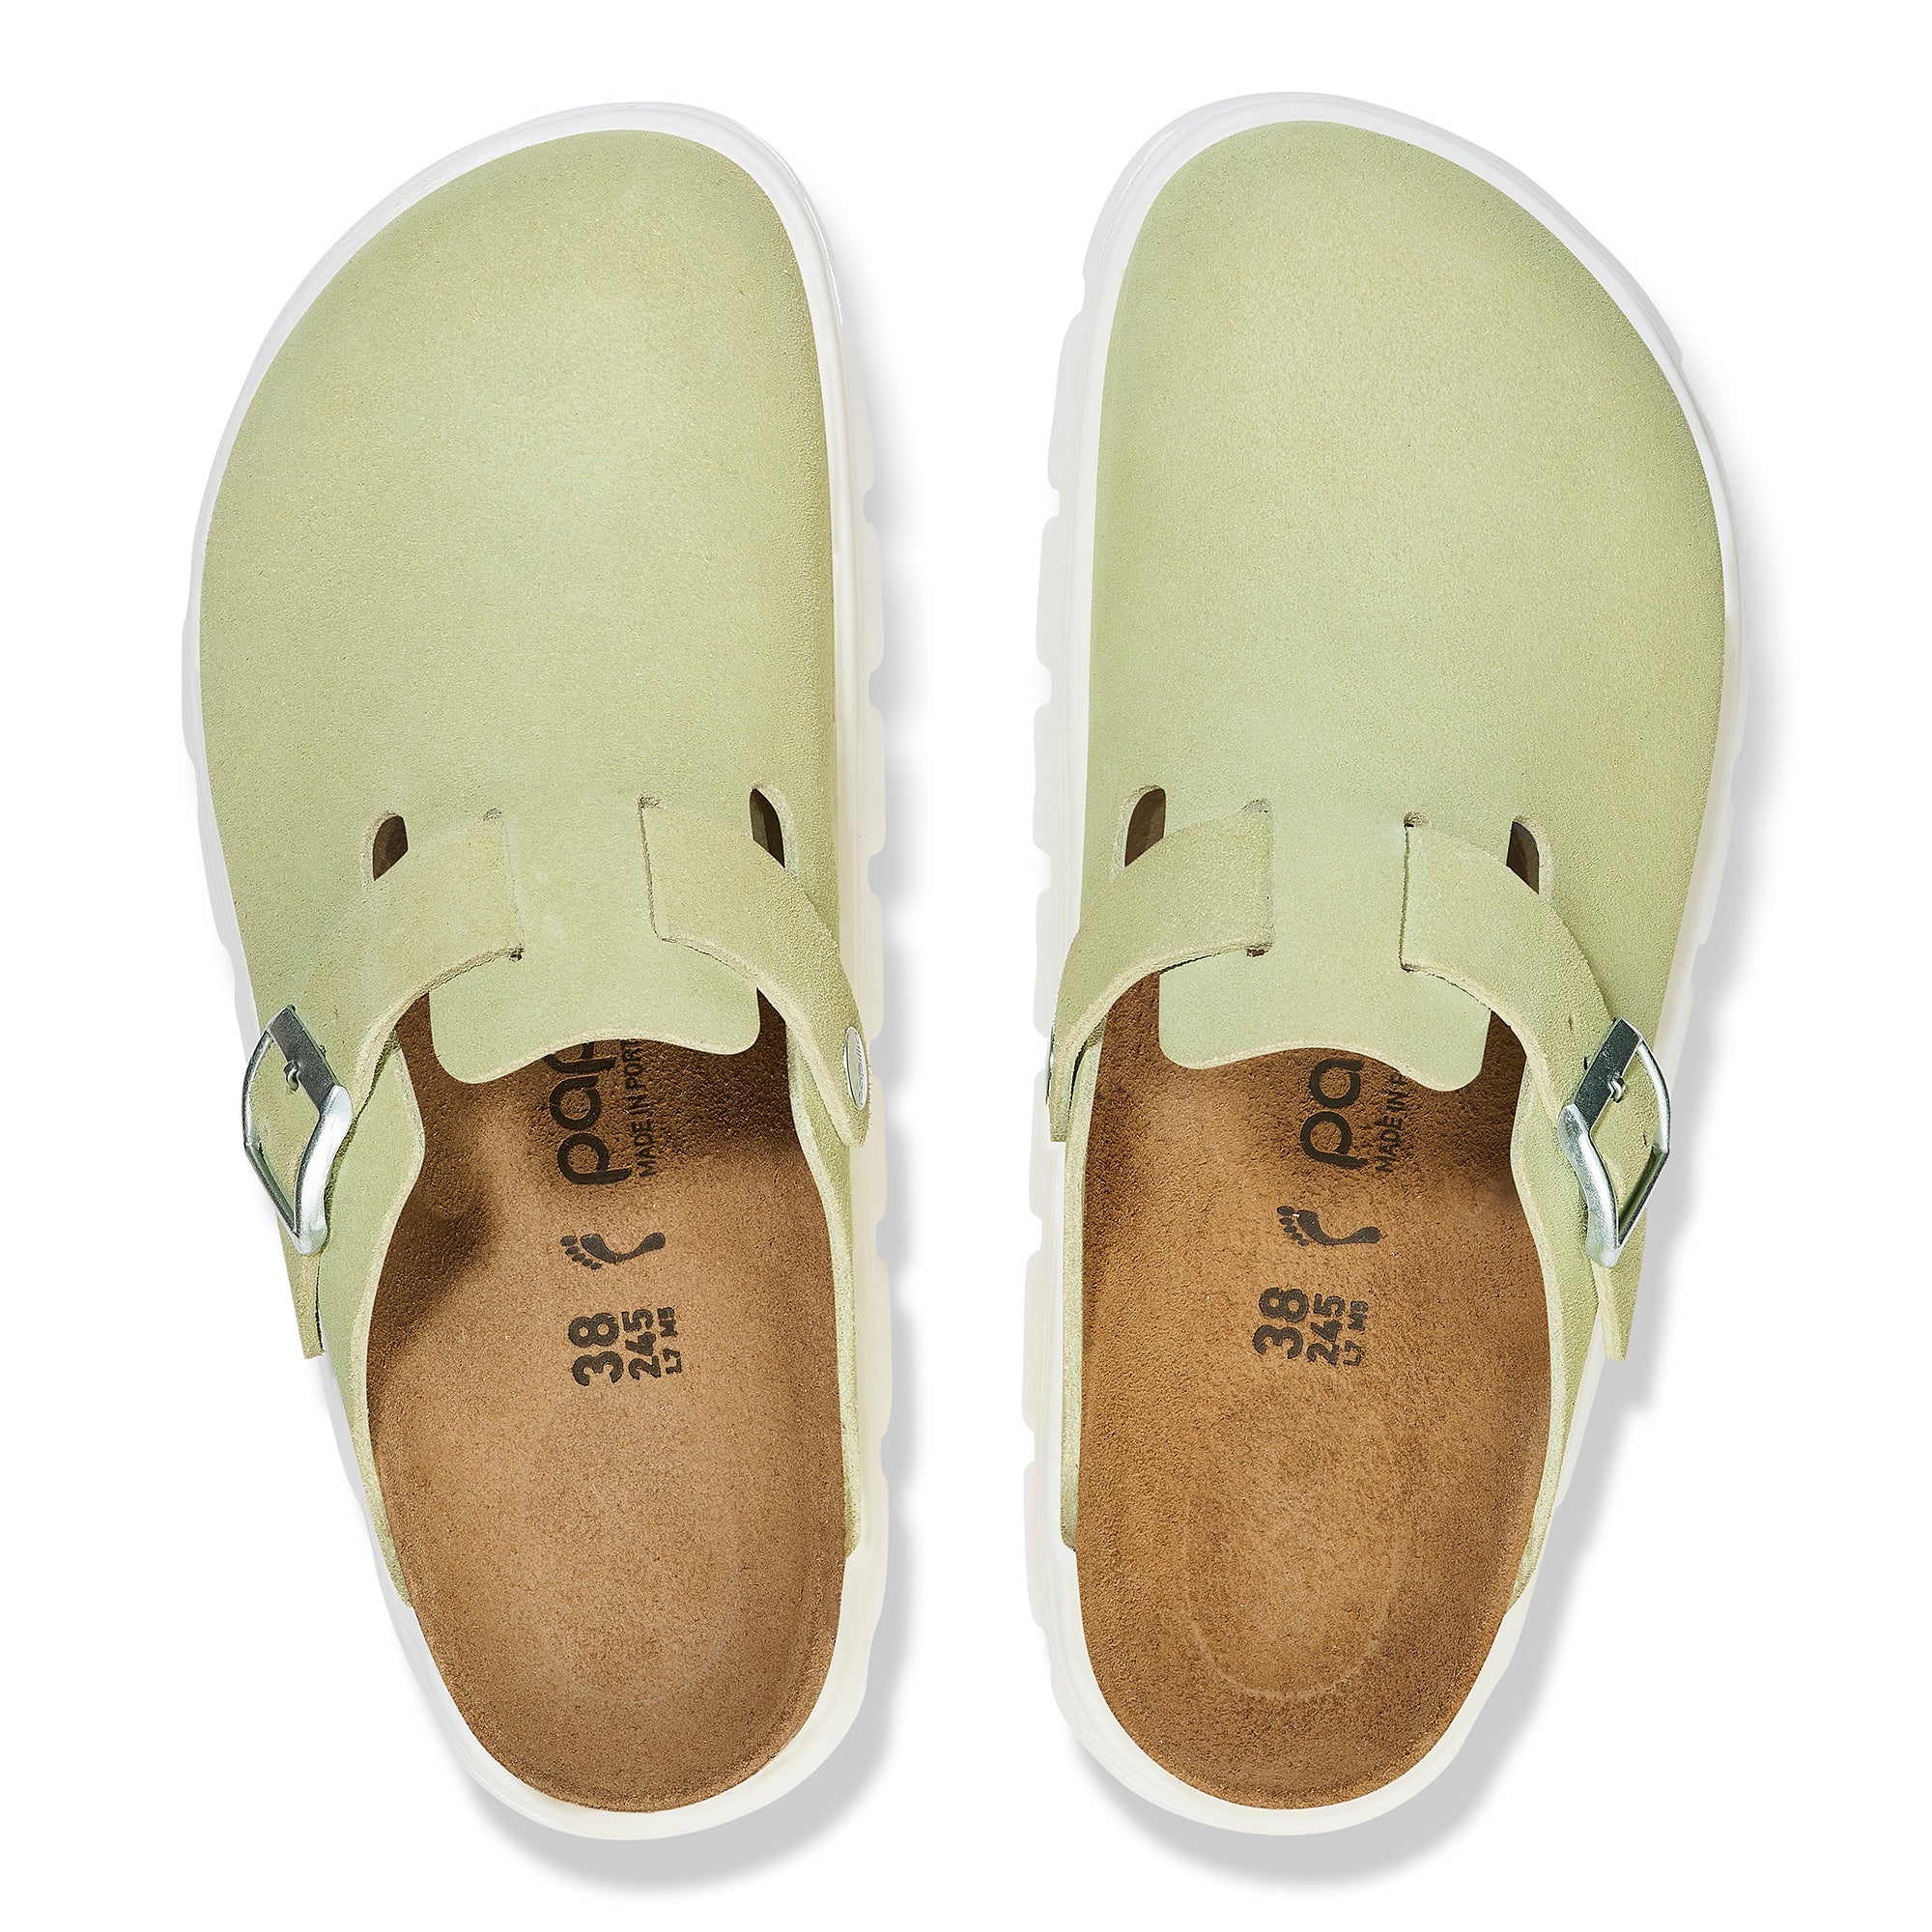 Papillio Boston Chunky faded lime suede by Birkenstock